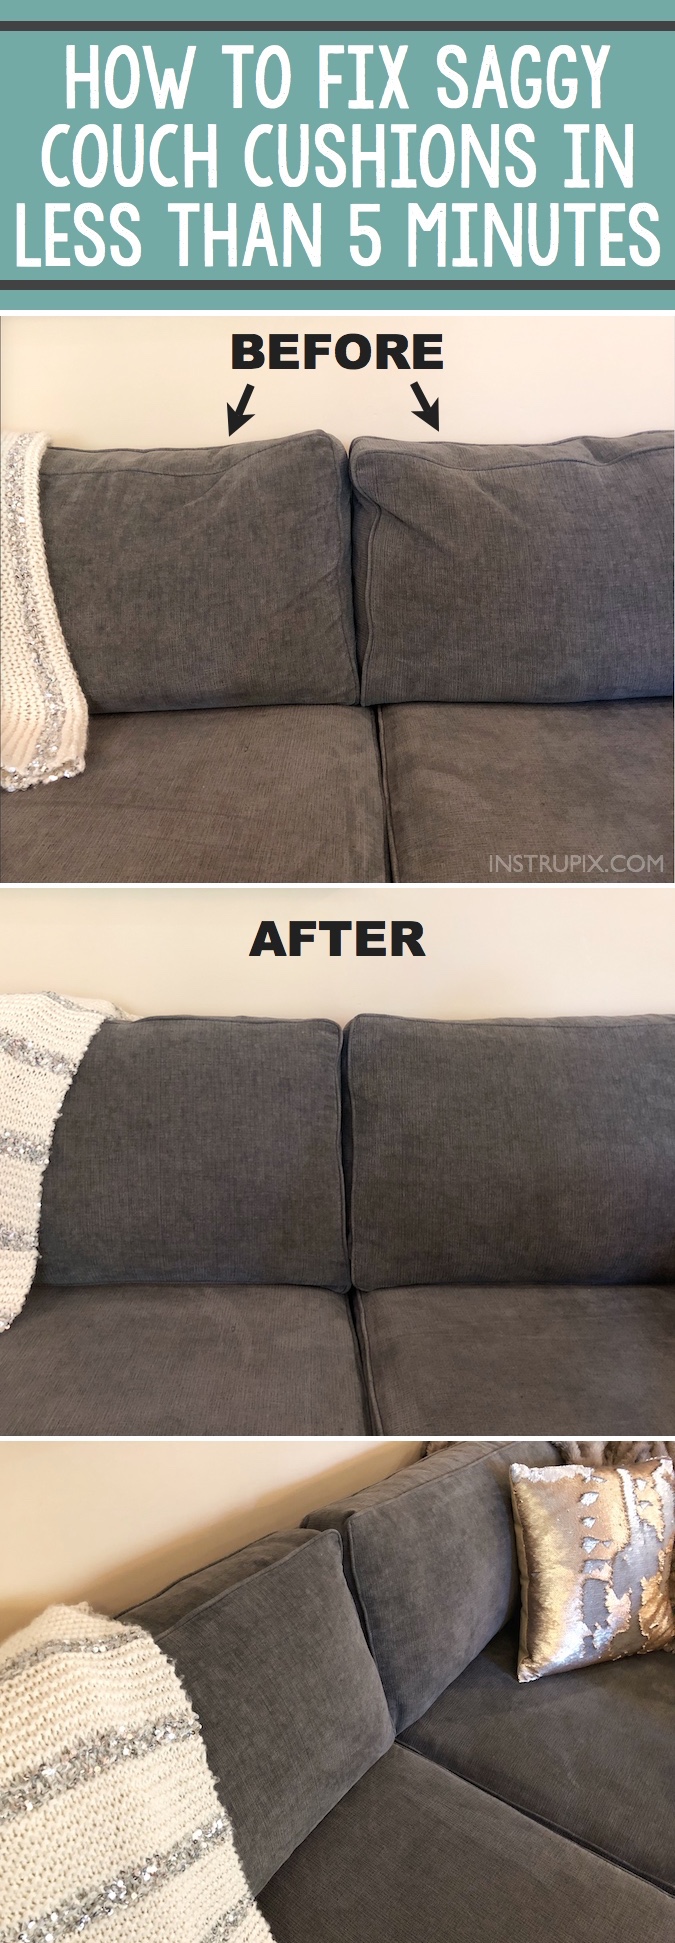 https://www.instrupix.com/wp-content/uploads/2017/11/how-to-fix-saggy-couch-cushions-in-less-than-5-minutes.jpg